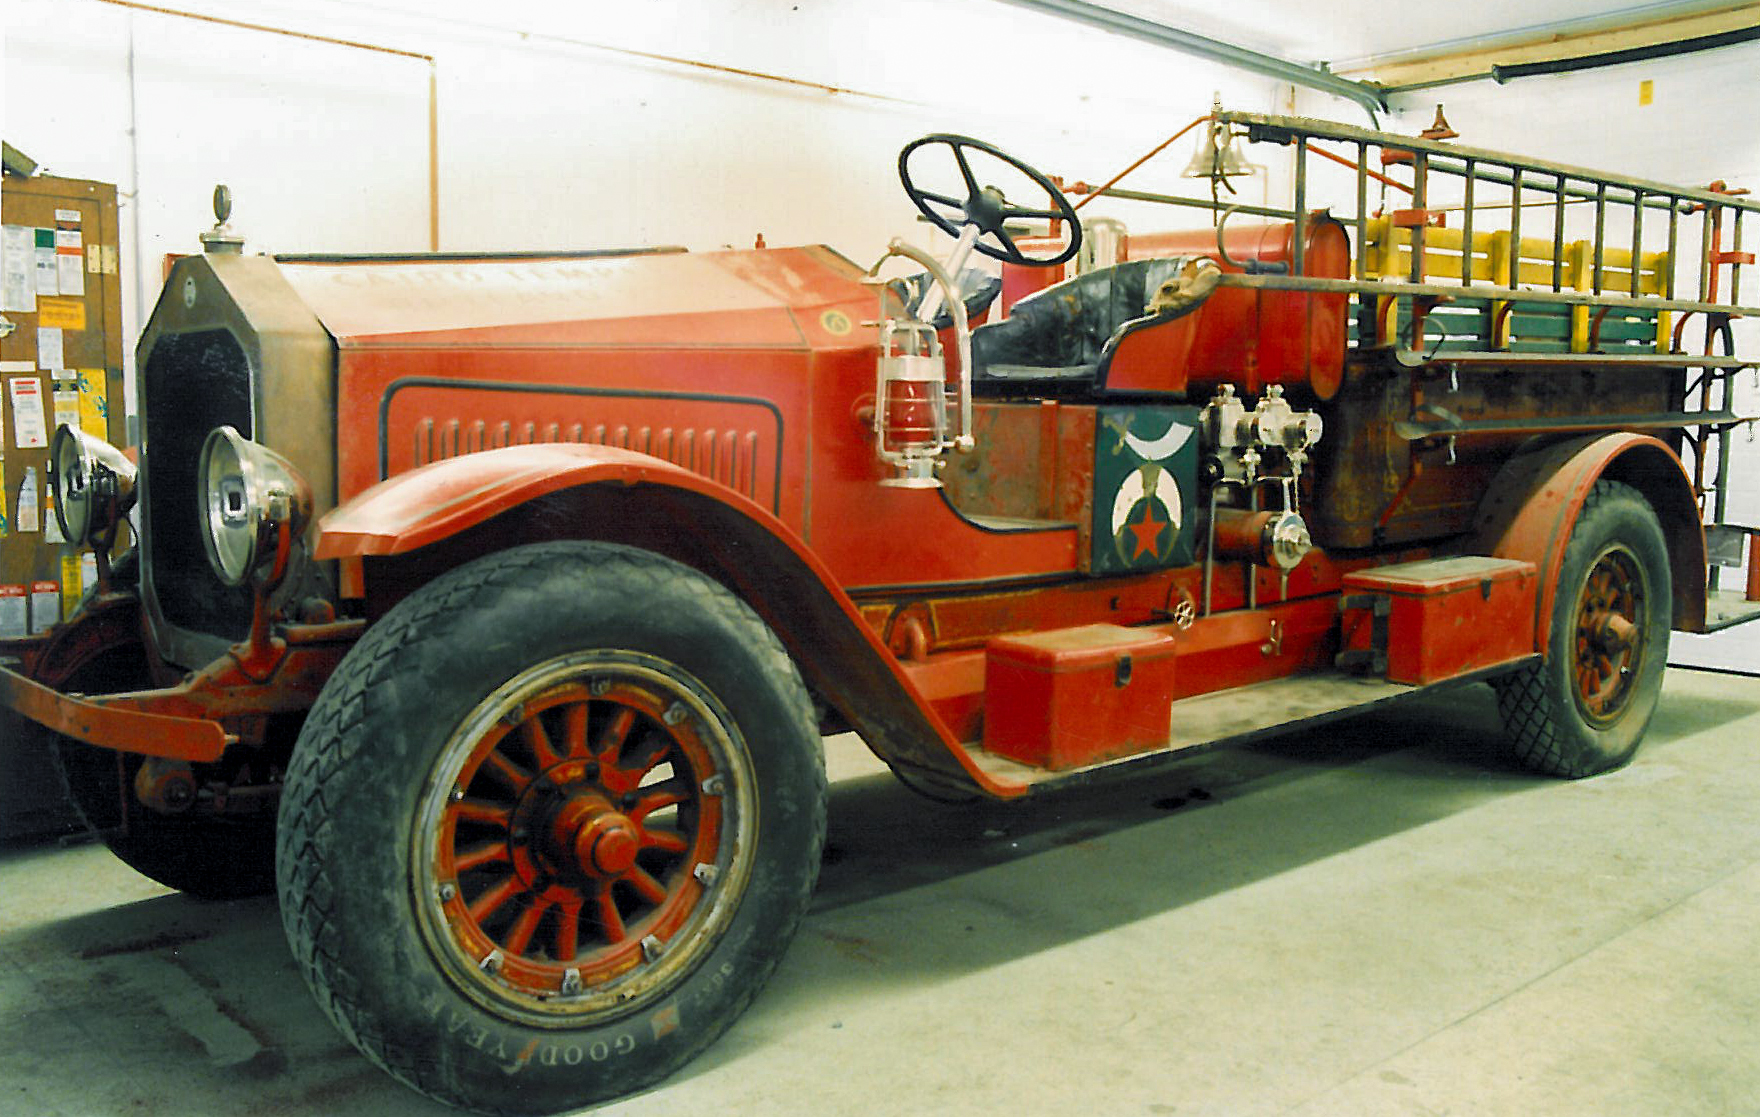  The 1923 Maxim was in poor condition when we found it in Rutland retired from parade use by the Shriners.&nbsp; 